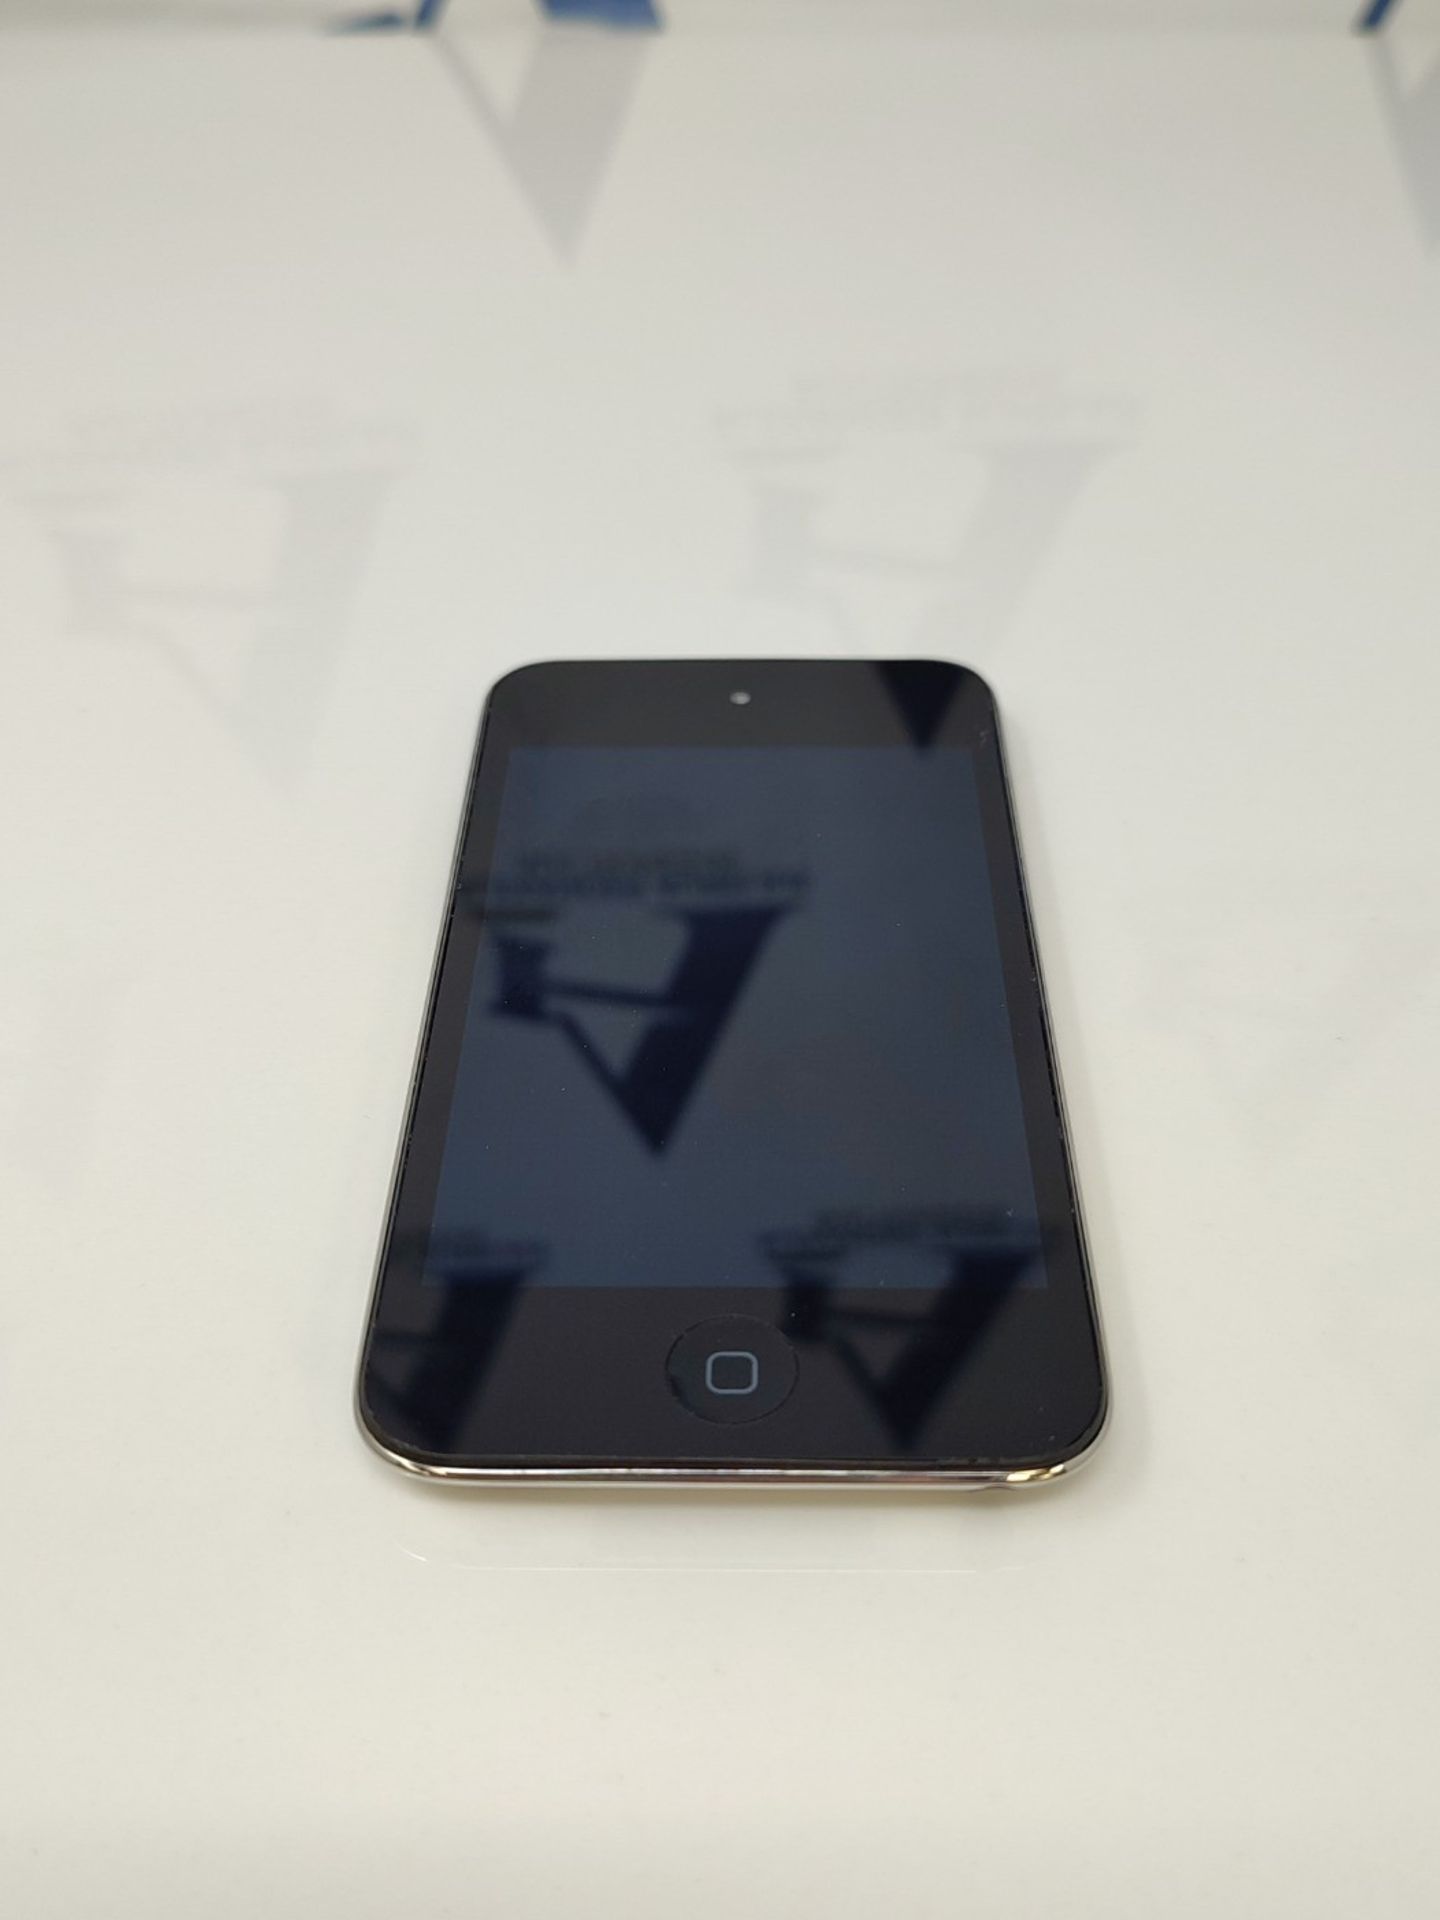 Apple iPod touch 8 GB 4th gen black - Image 2 of 3